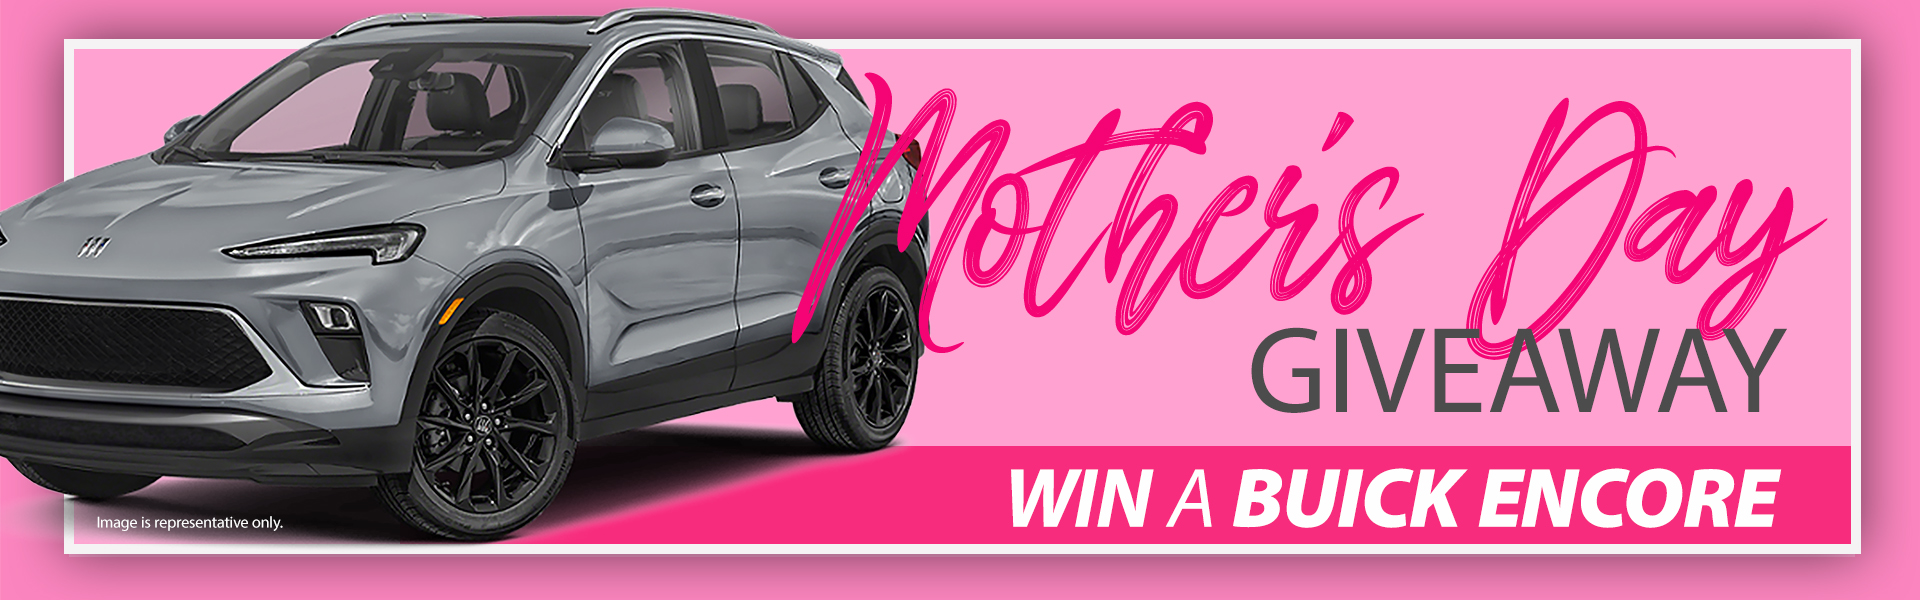 RNR Tire Express Announces 8th Annual Mother's Day Giveaway | THE SHOP